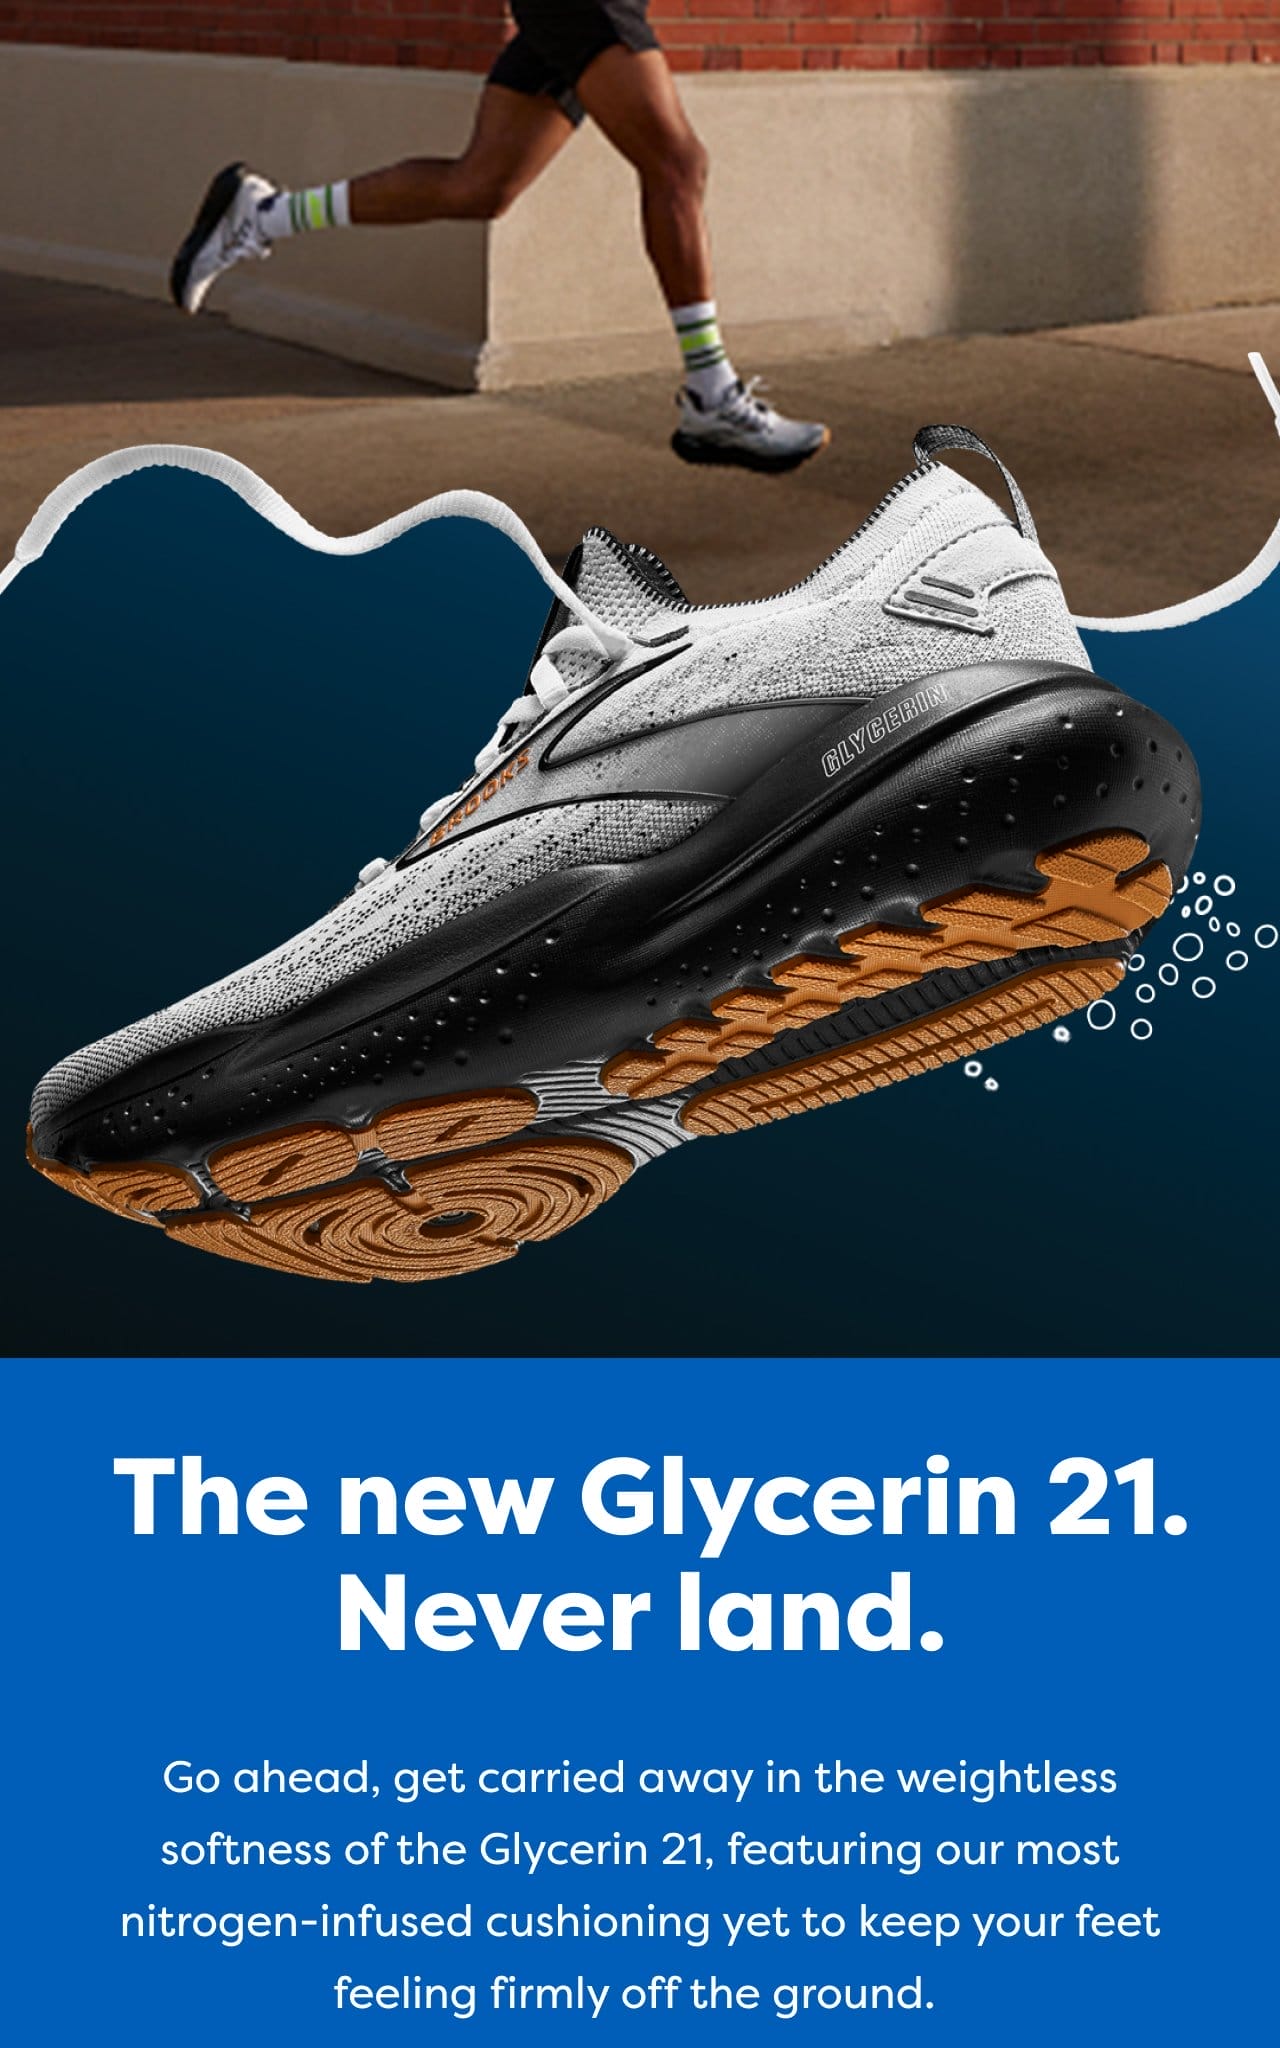 The new Glycerin 21. Never land. Go ahead, get carried away in the weightless softness of the Glycerin 21, featuring our most nitrogen-infused cushioning yet to keep your feet feeling firmly off the ground.